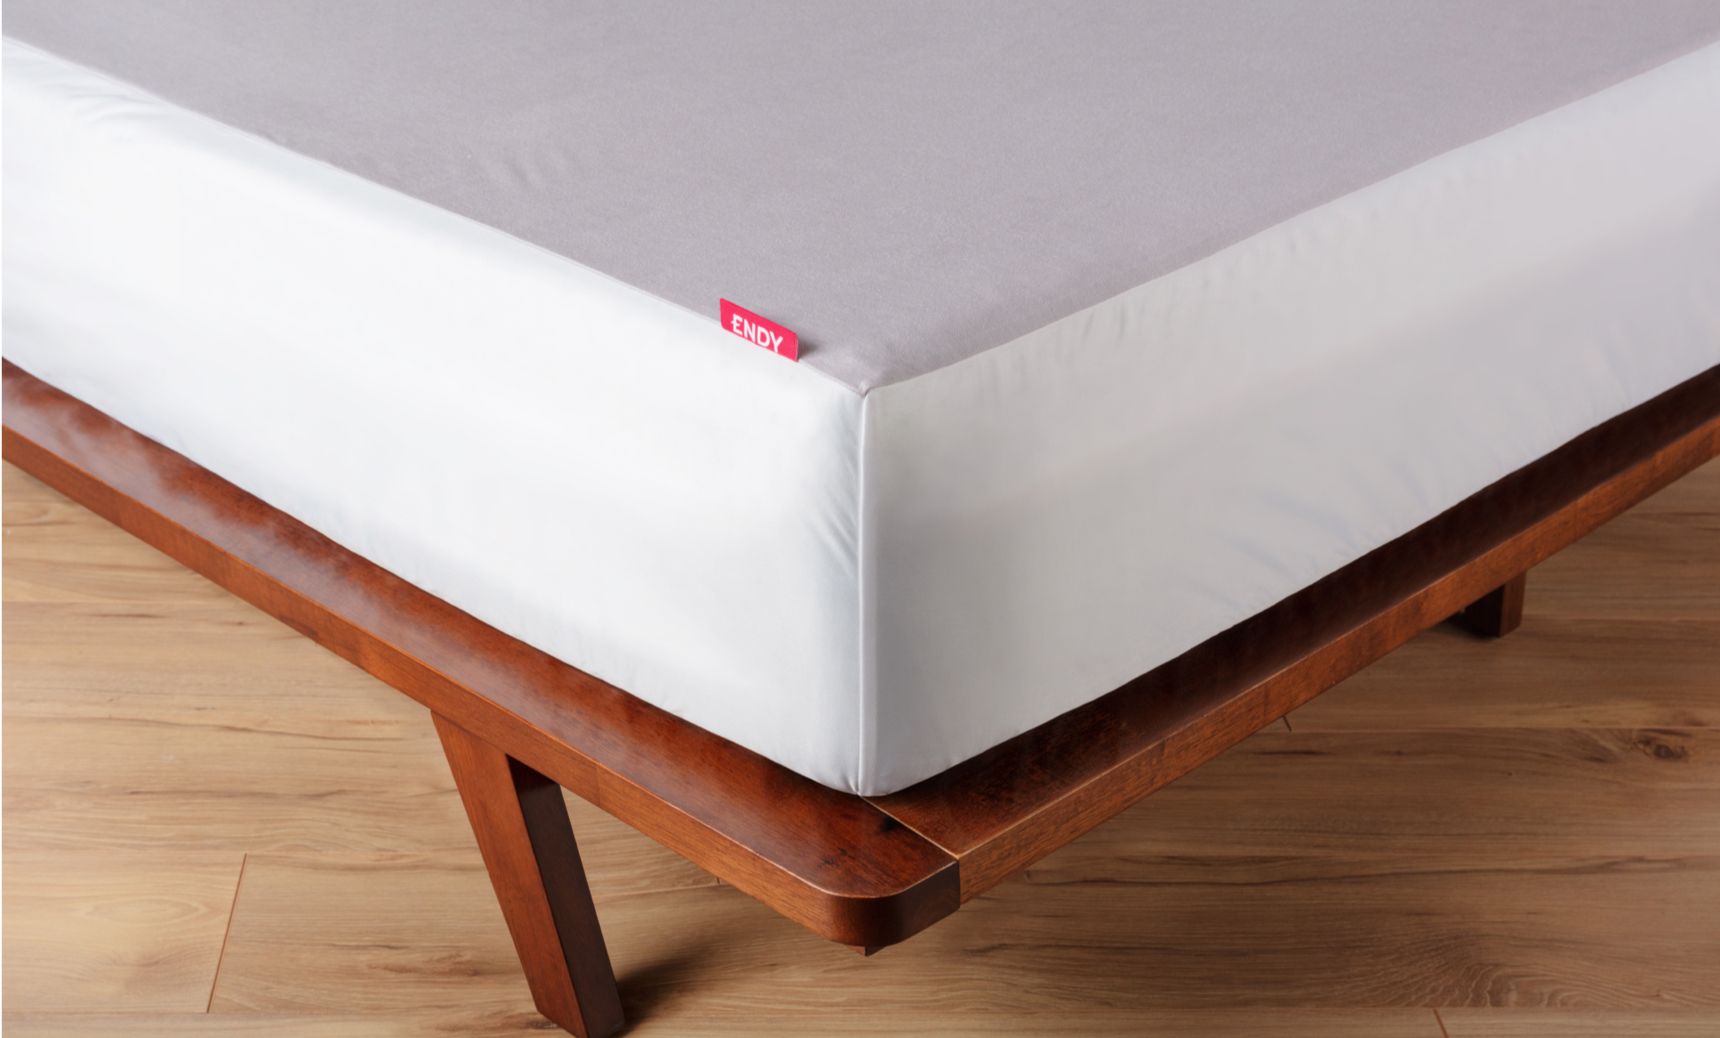 The Endy Mattress Protector